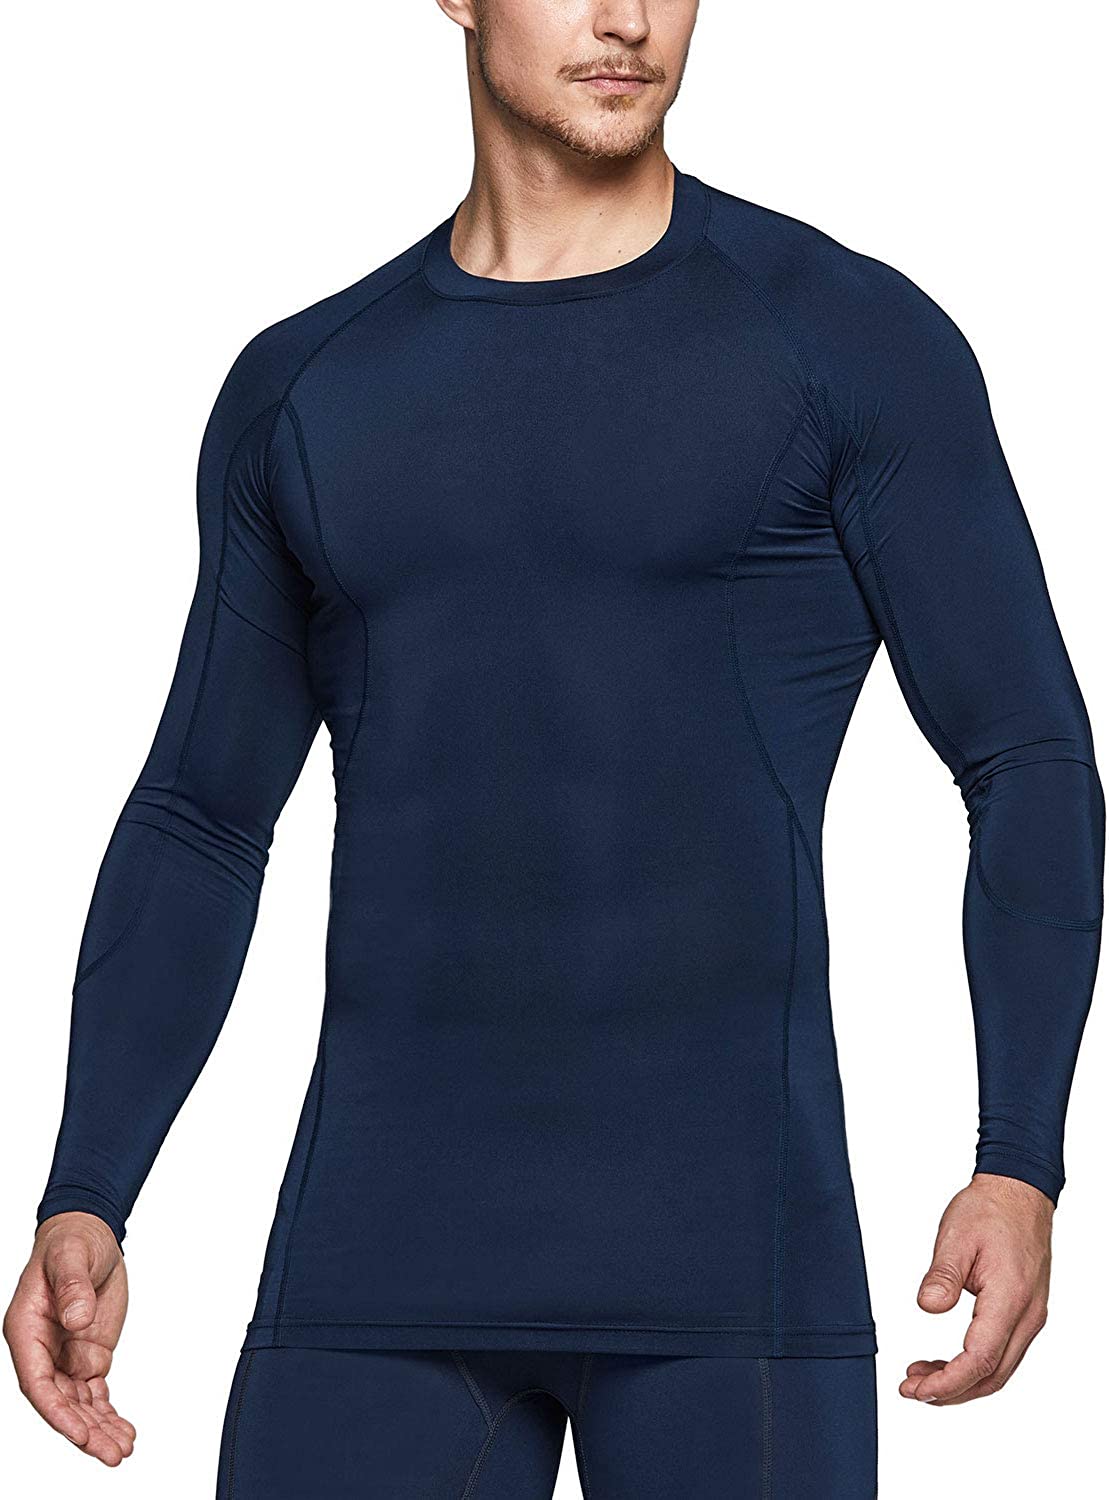 Details about   FITTOO Men's Long Sleeve T-Shirt Thermal Run Cool Dry Athletic Compression Top G 